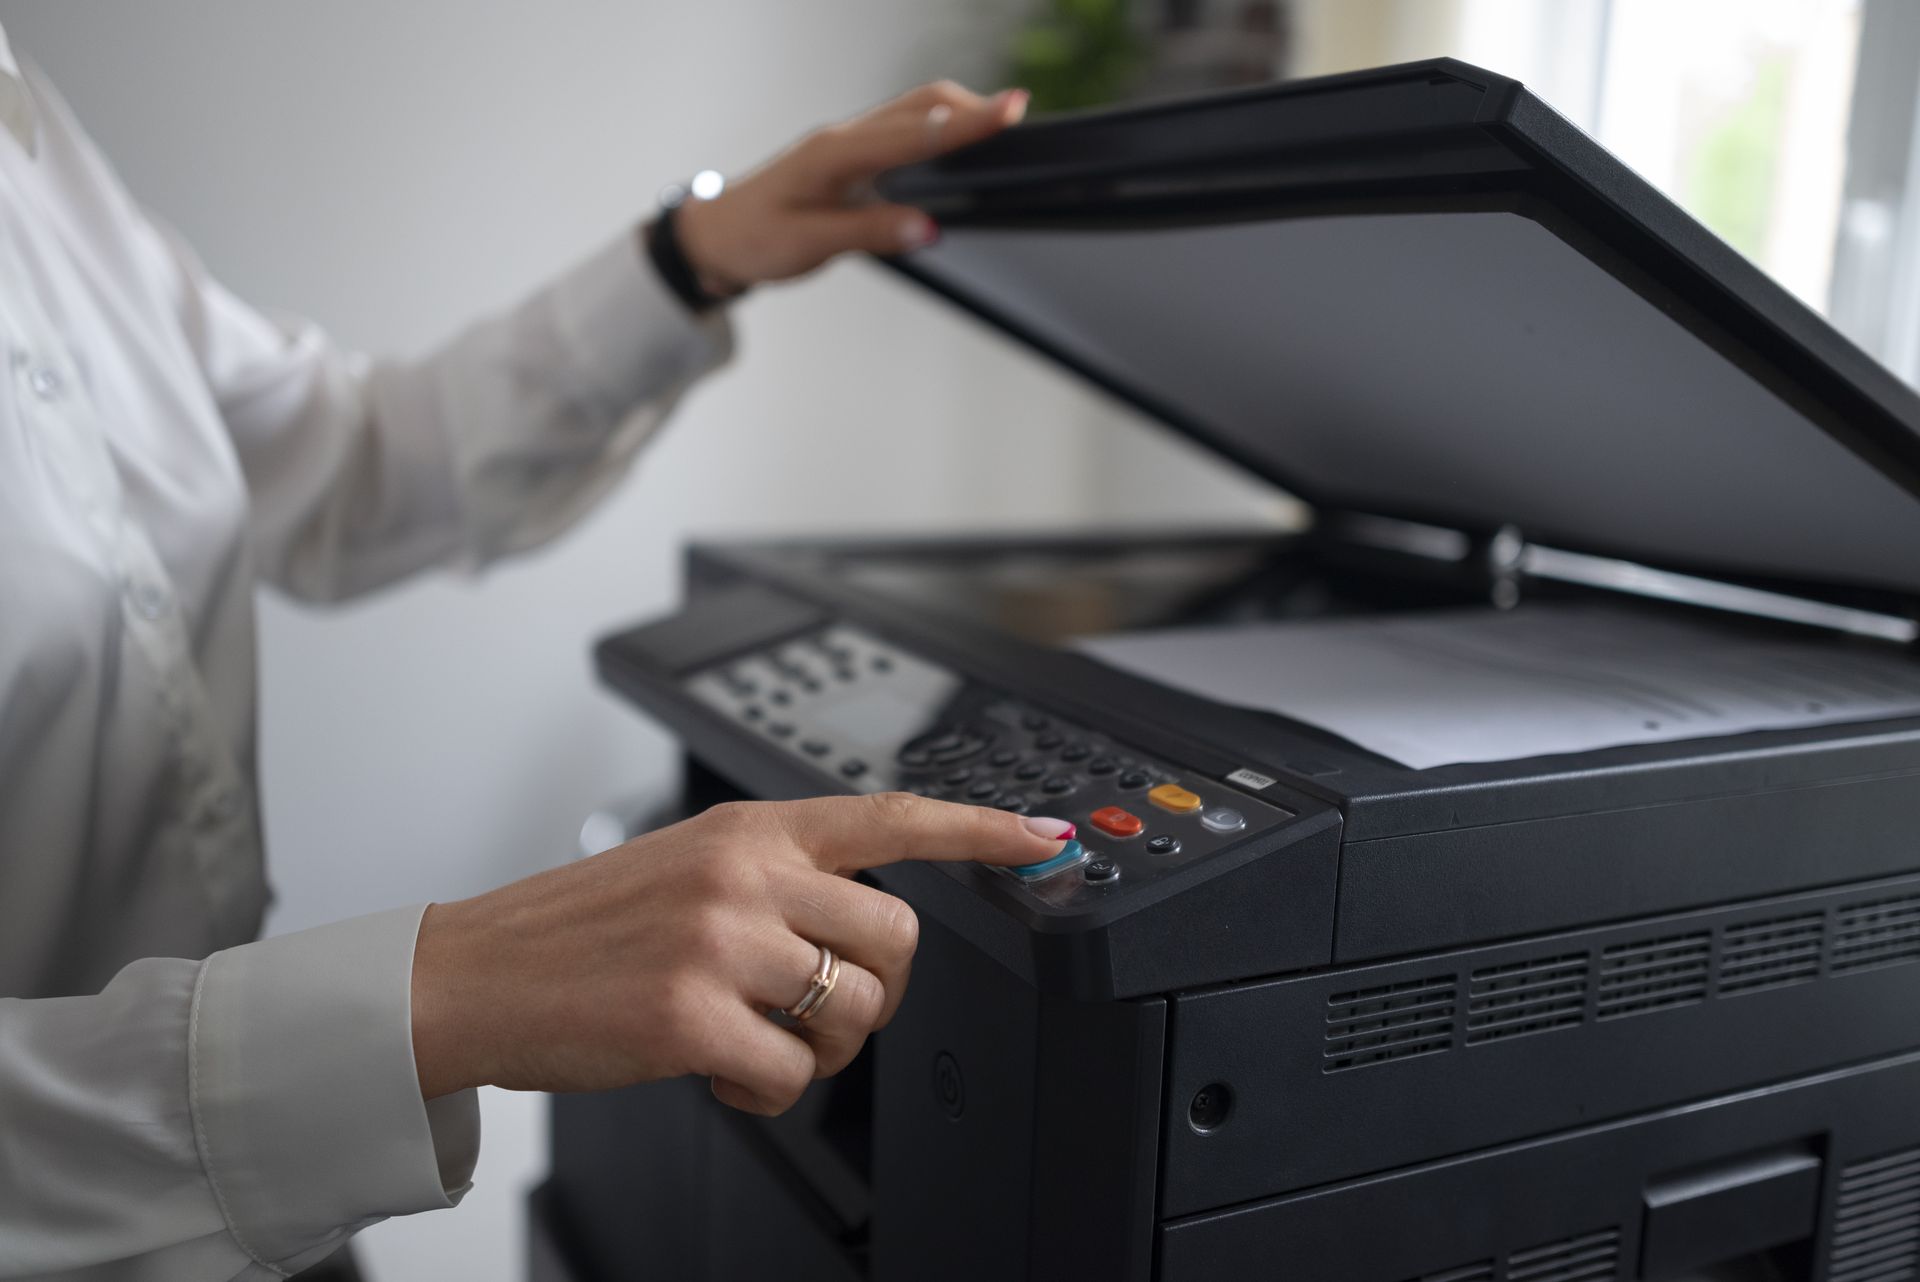 5 reasons to ditch the scanner